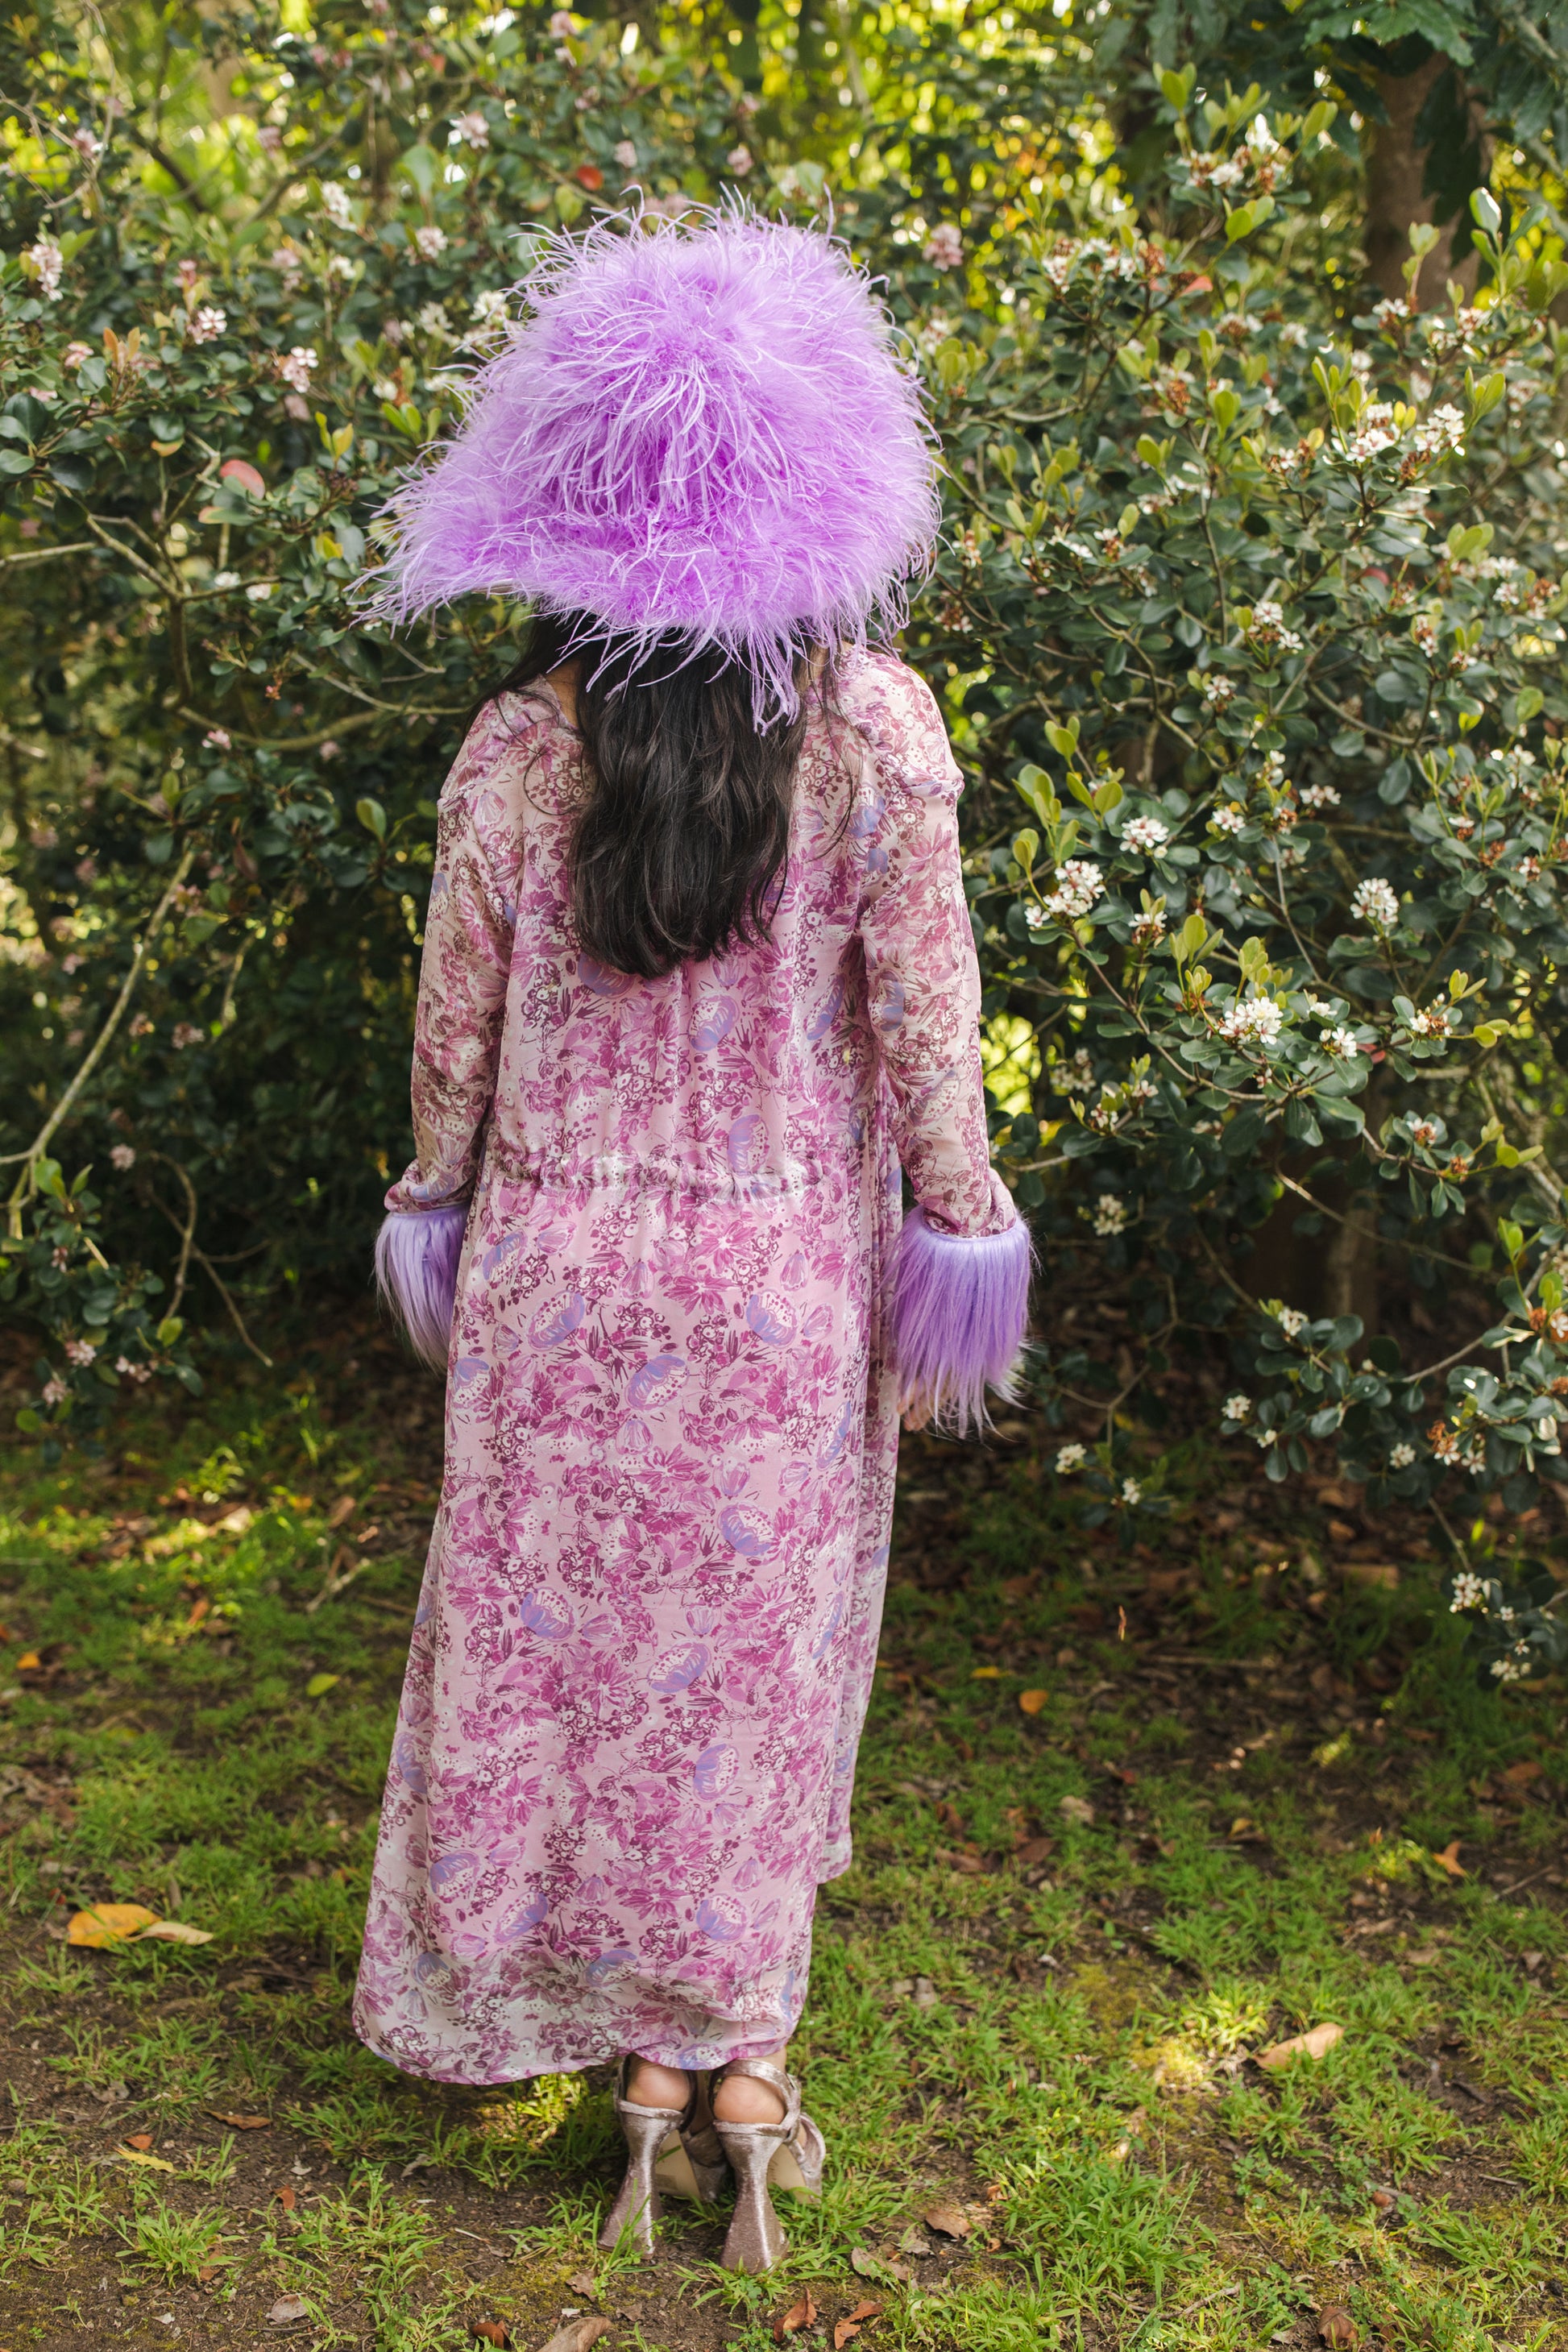 jennafer grace Violeta Faux Fur Duster pastel violet lavender lilac purple pink floral duster with pastel purple faux fur cuffs light jacket coat robe coverup layering boho bohemian hippie romantic whimsical unisex handmade in California USA